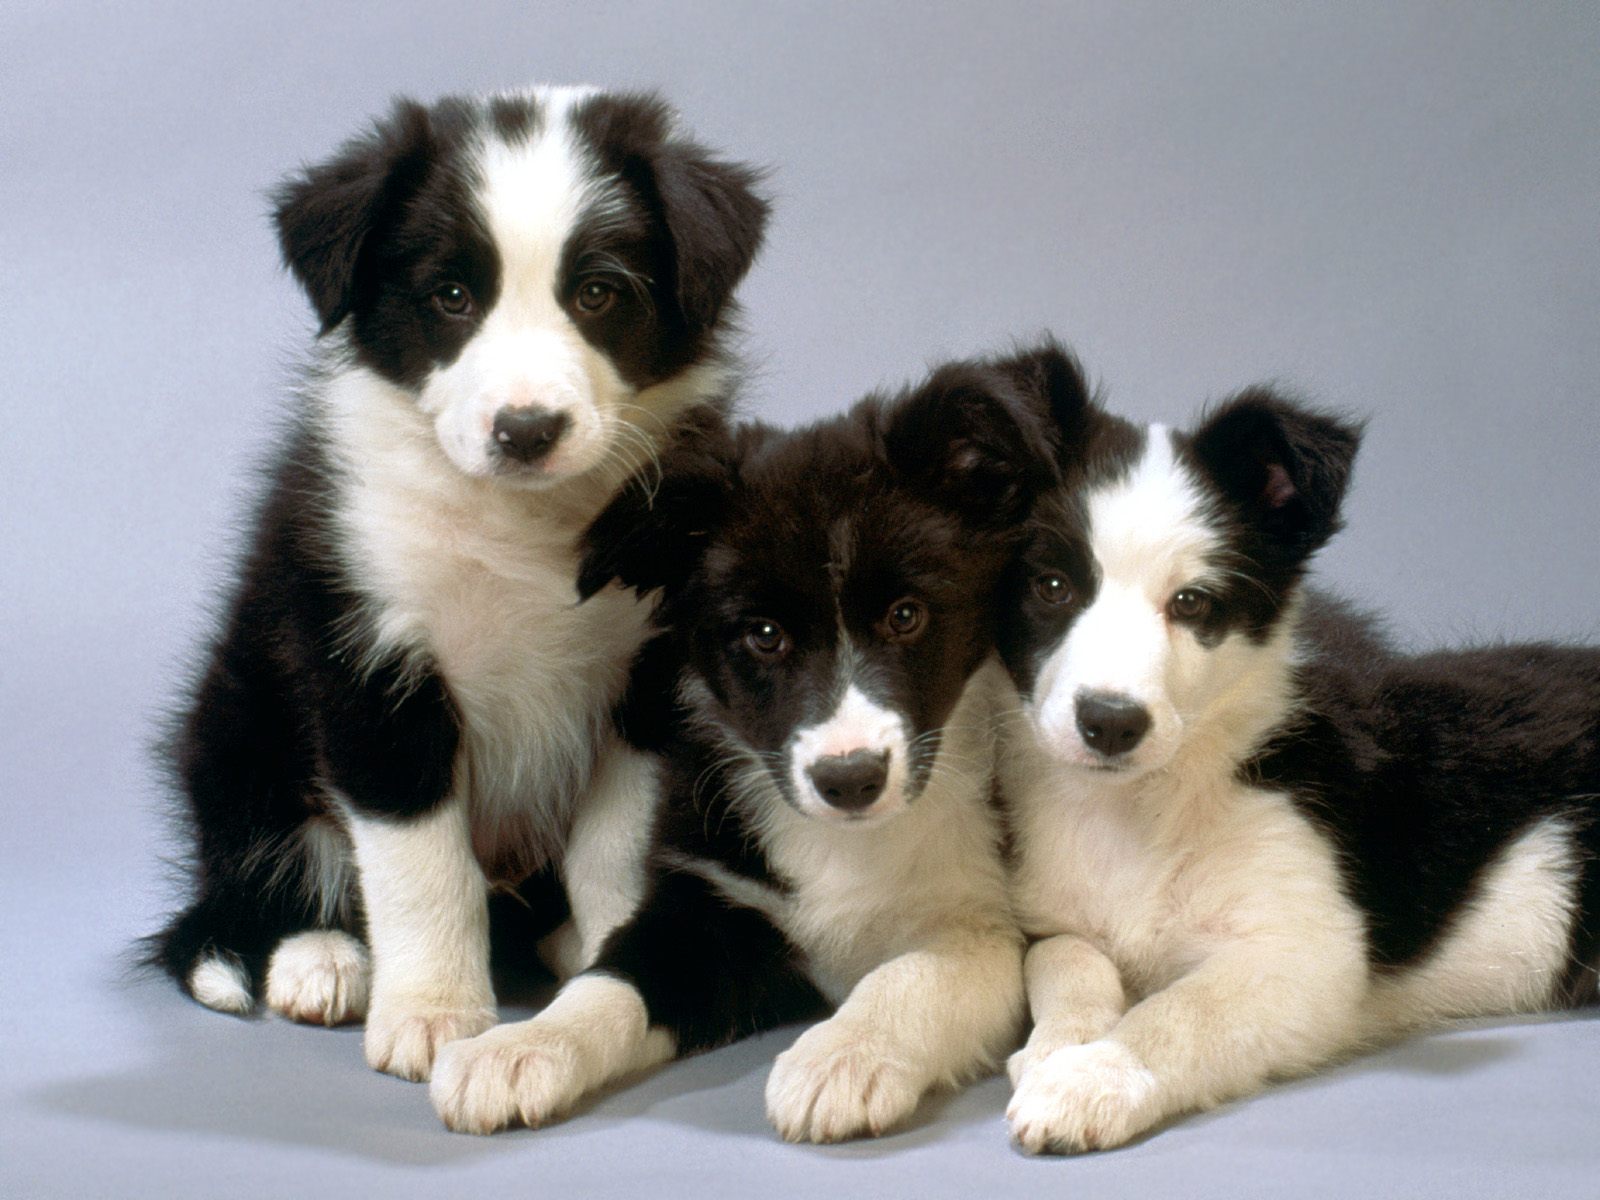 http://3.bp.blogspot.com/-WiaUiOl6QWY/TXn5vCovWTI/AAAAAAAAF7Y/B41wZM9M3GY/s1600/Border-Collie-Cute-and-Clever-Dog-wallpapers-pictures.jpg